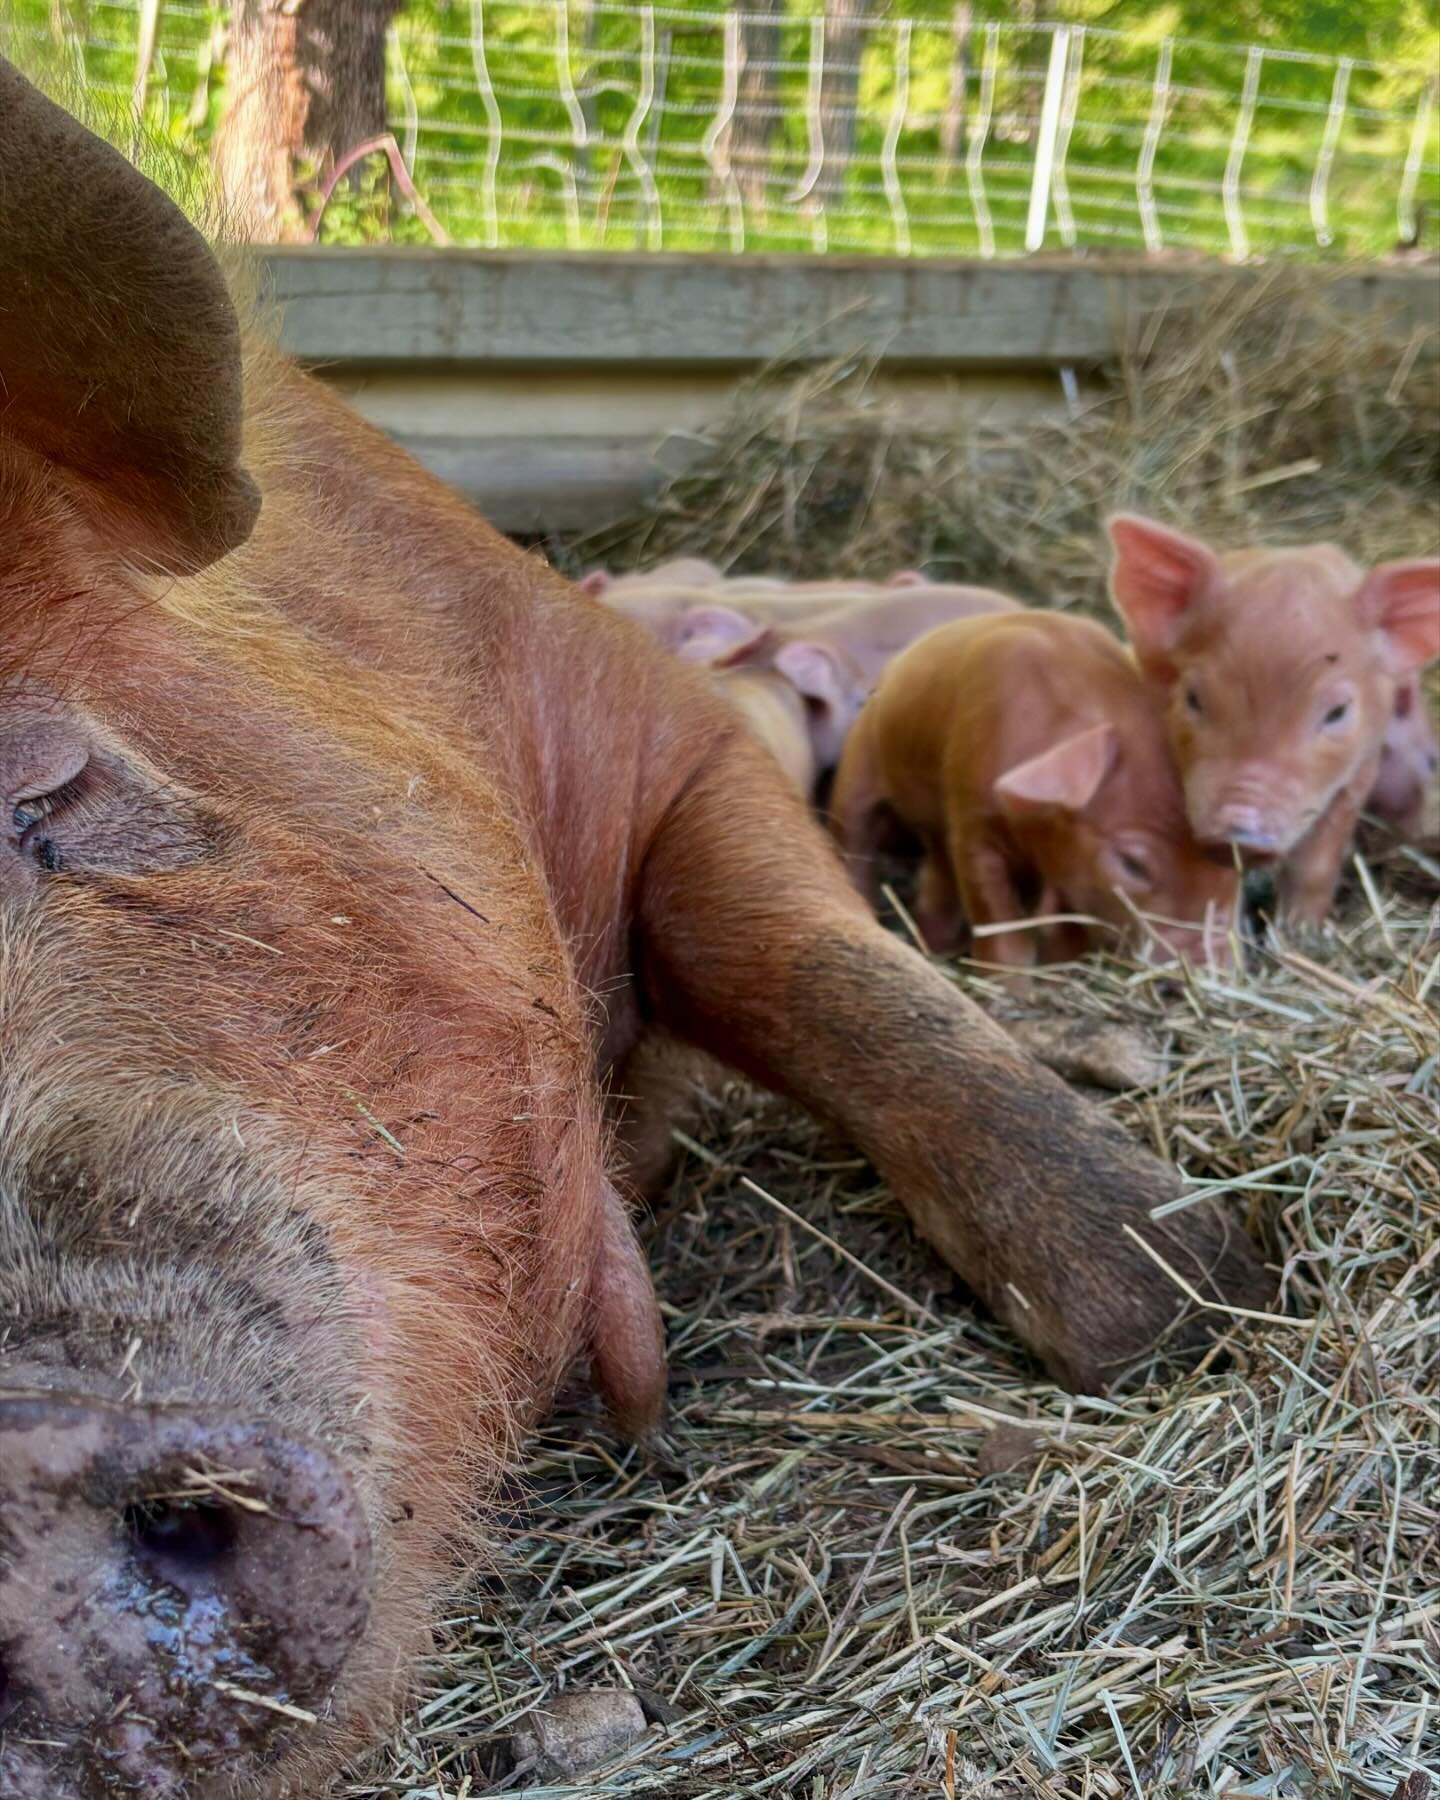 Some new additions to our farm!  Springtime 🐷.

Give me a shout if you want to reserve a piggy&hellip;.. ready in 8 weeks. Half Red Wattle, half Tamworth. 

#homegrown #homesteadlife #sistainableagriculture #permaculture #freerangepigs #heritagepigs